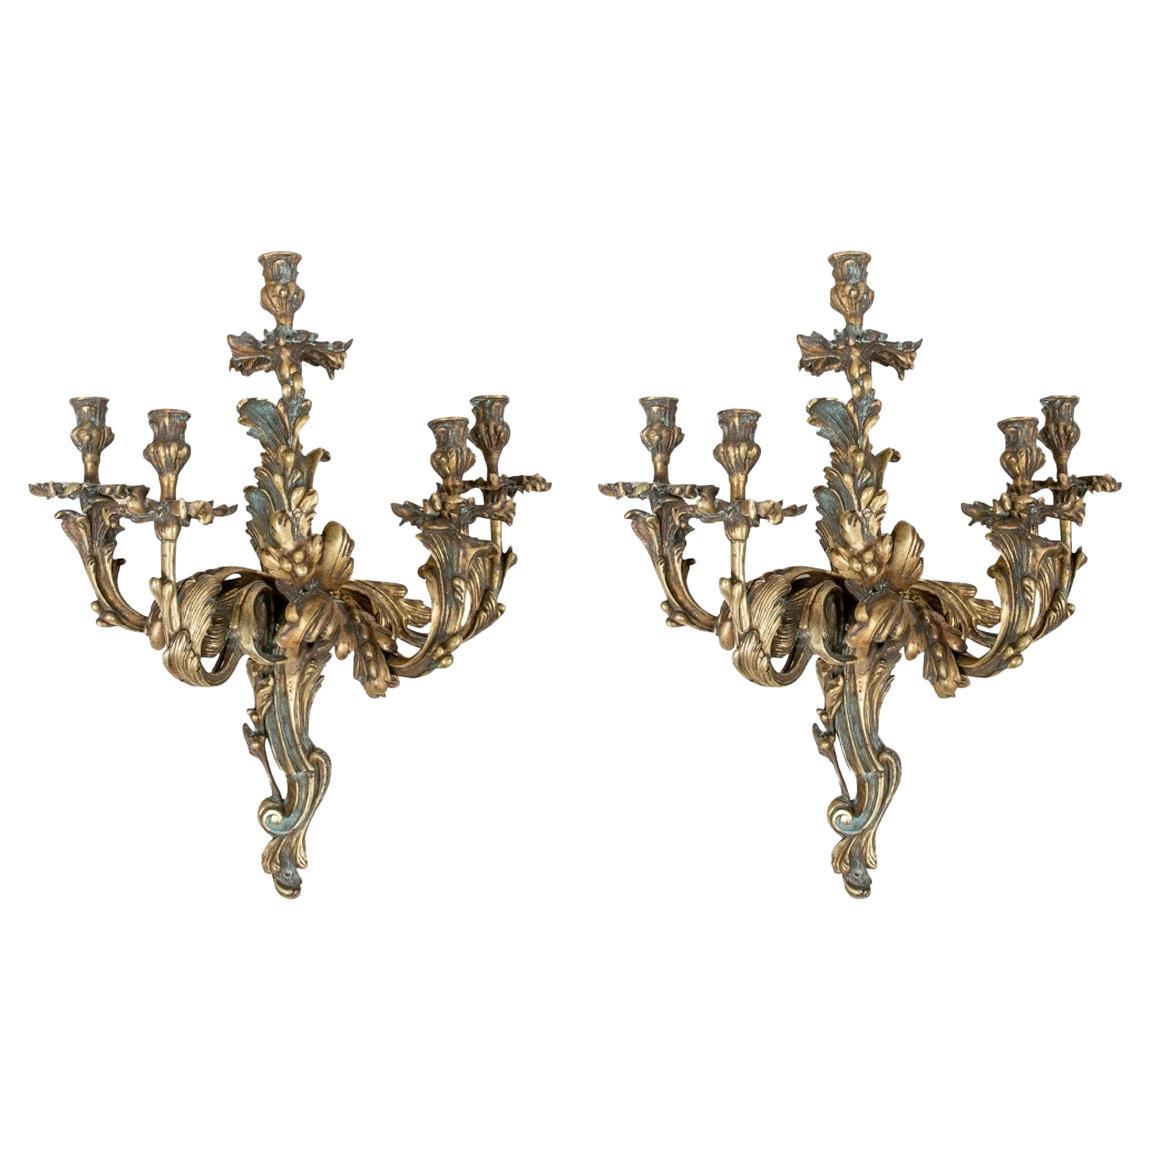 Pair Of Grand 19th C. French Bronze Five Candle Light Sconces